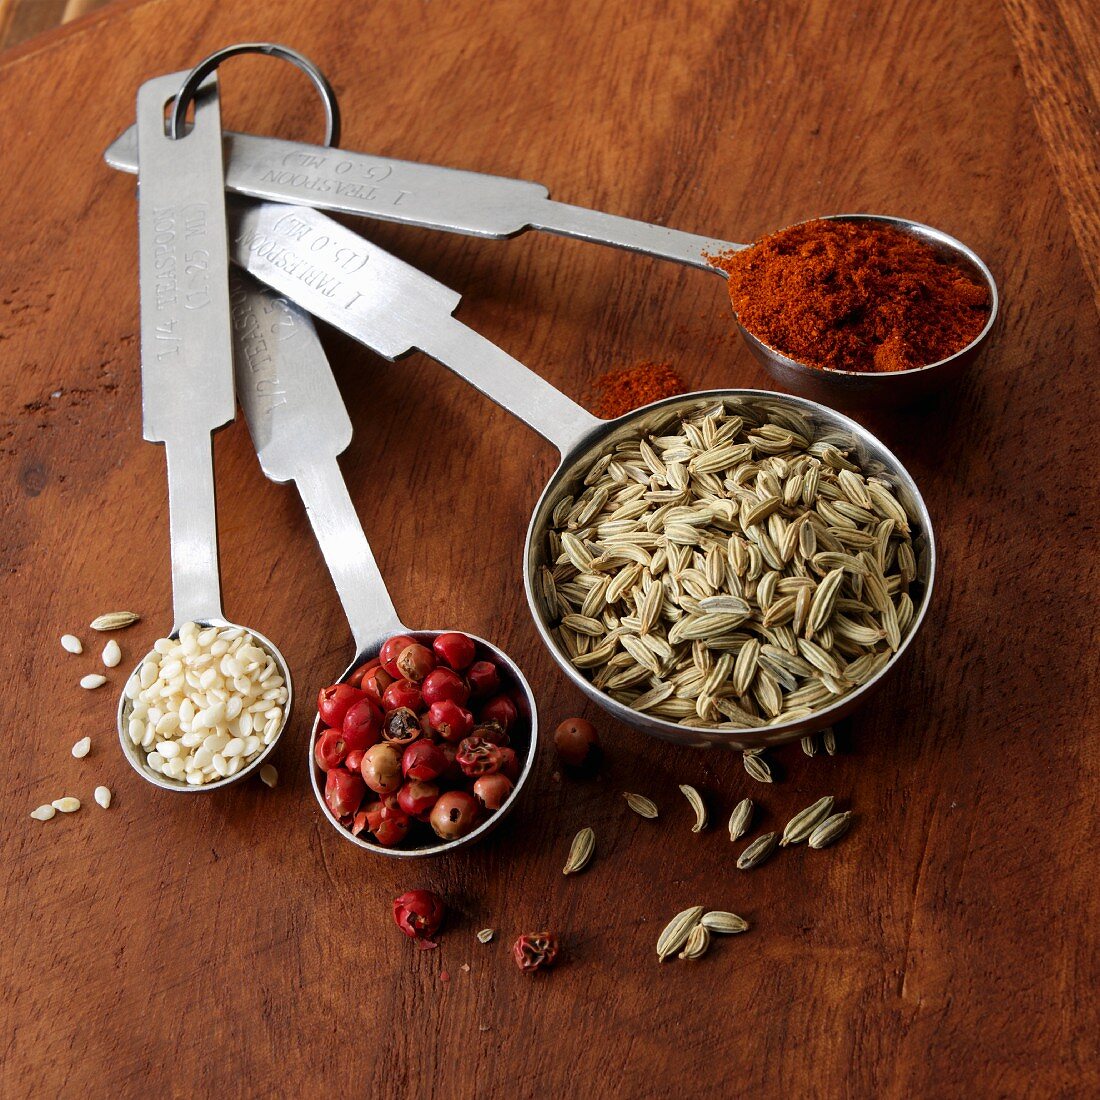 Spices and sesame seeds in measuring spoons